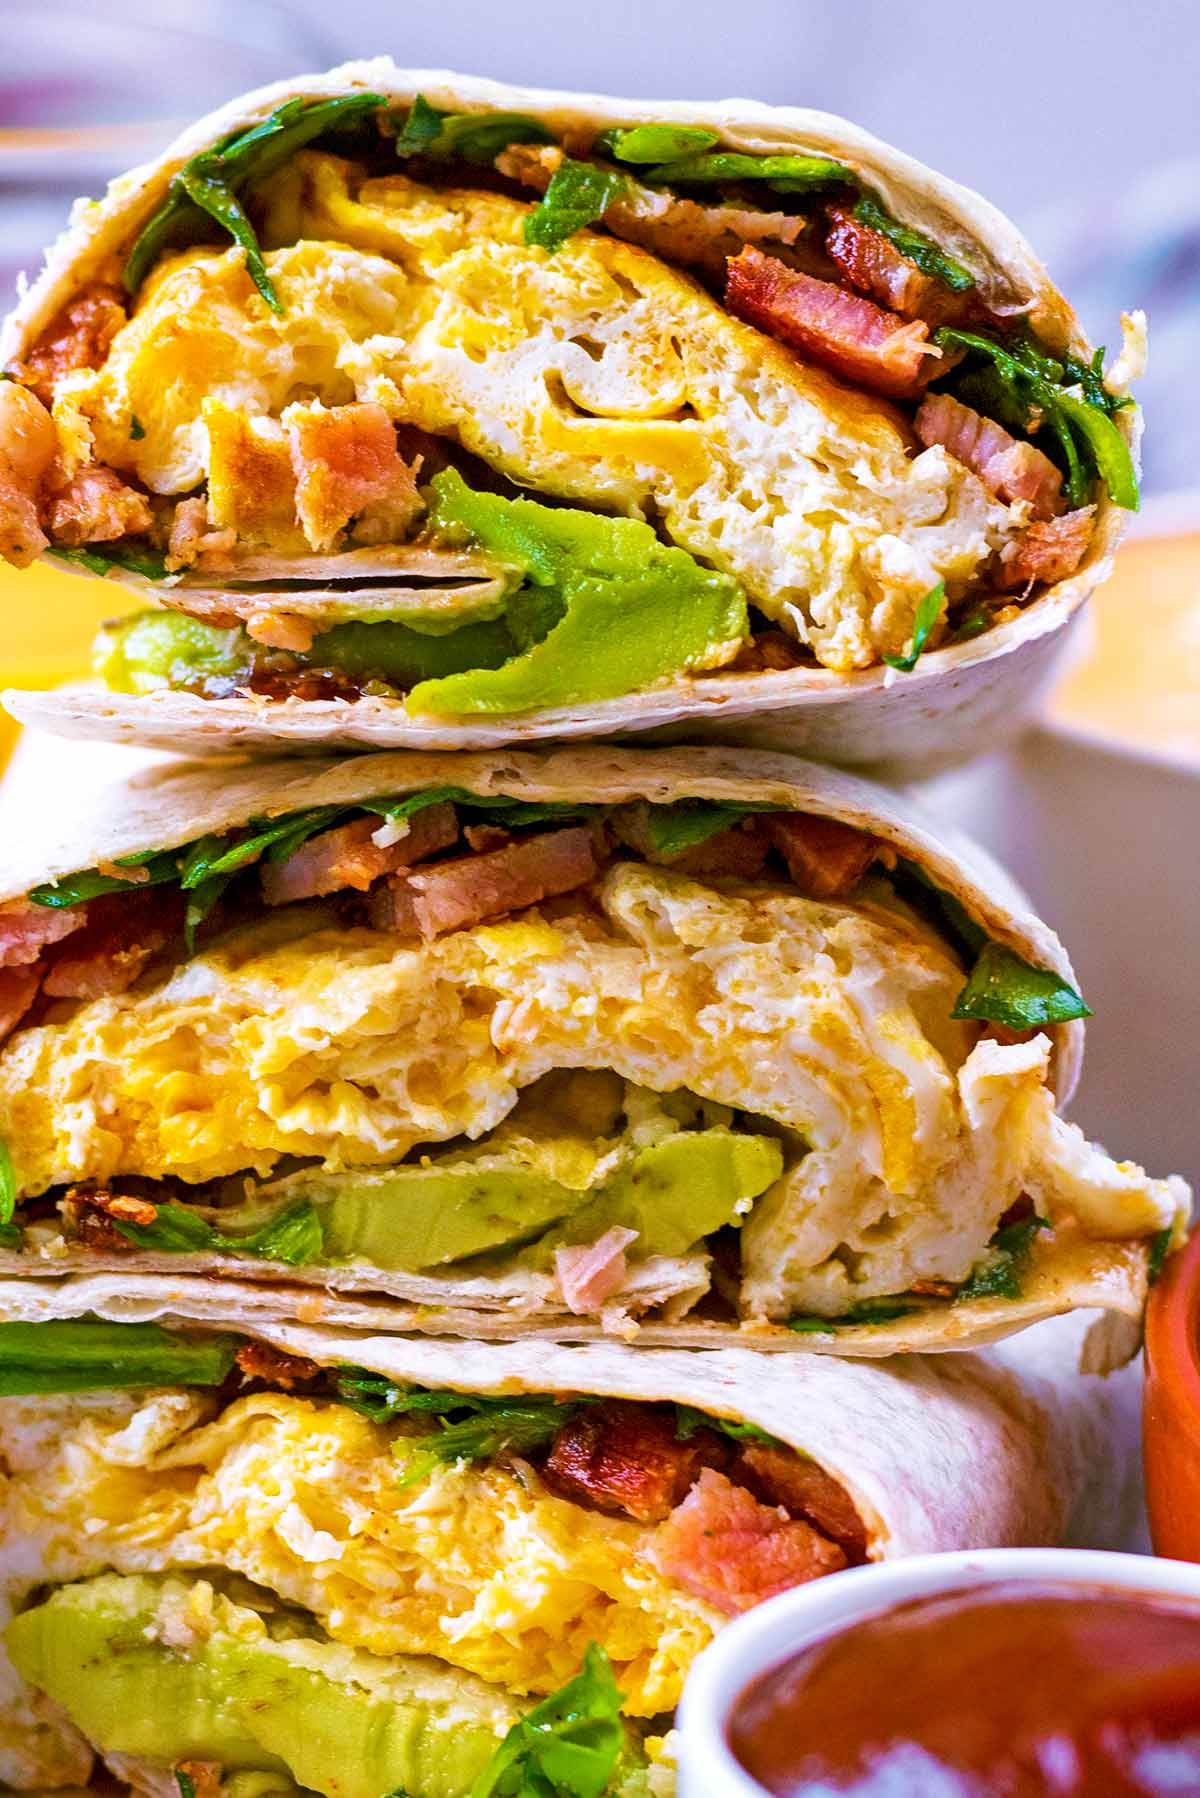 Breakfast wraps showing egg, bacon, avocado and spinach.